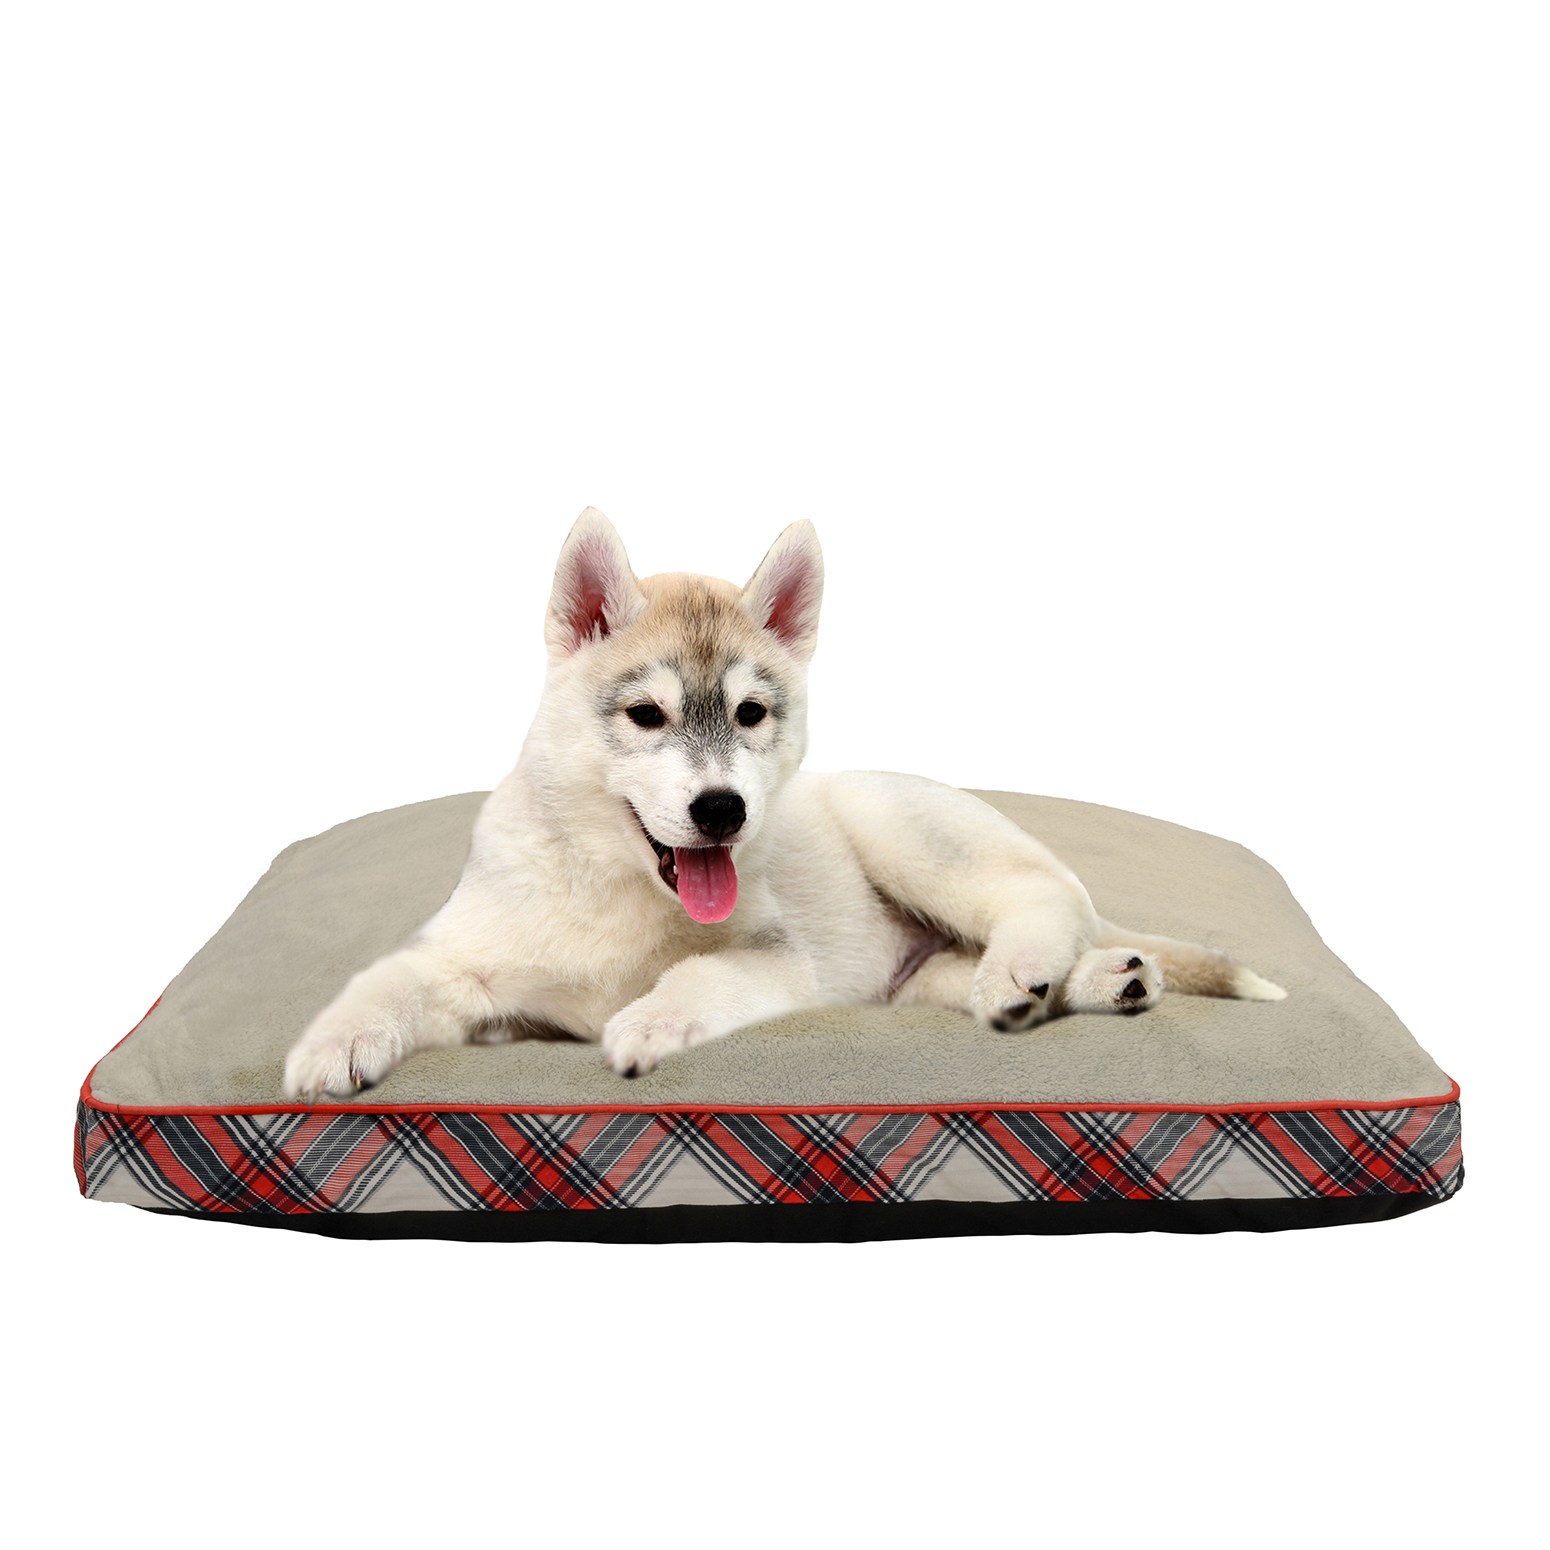 Holiday Time Gusseted Pet Bed, X-Large, 32"x 42", Red/Tan - image 1 of 5